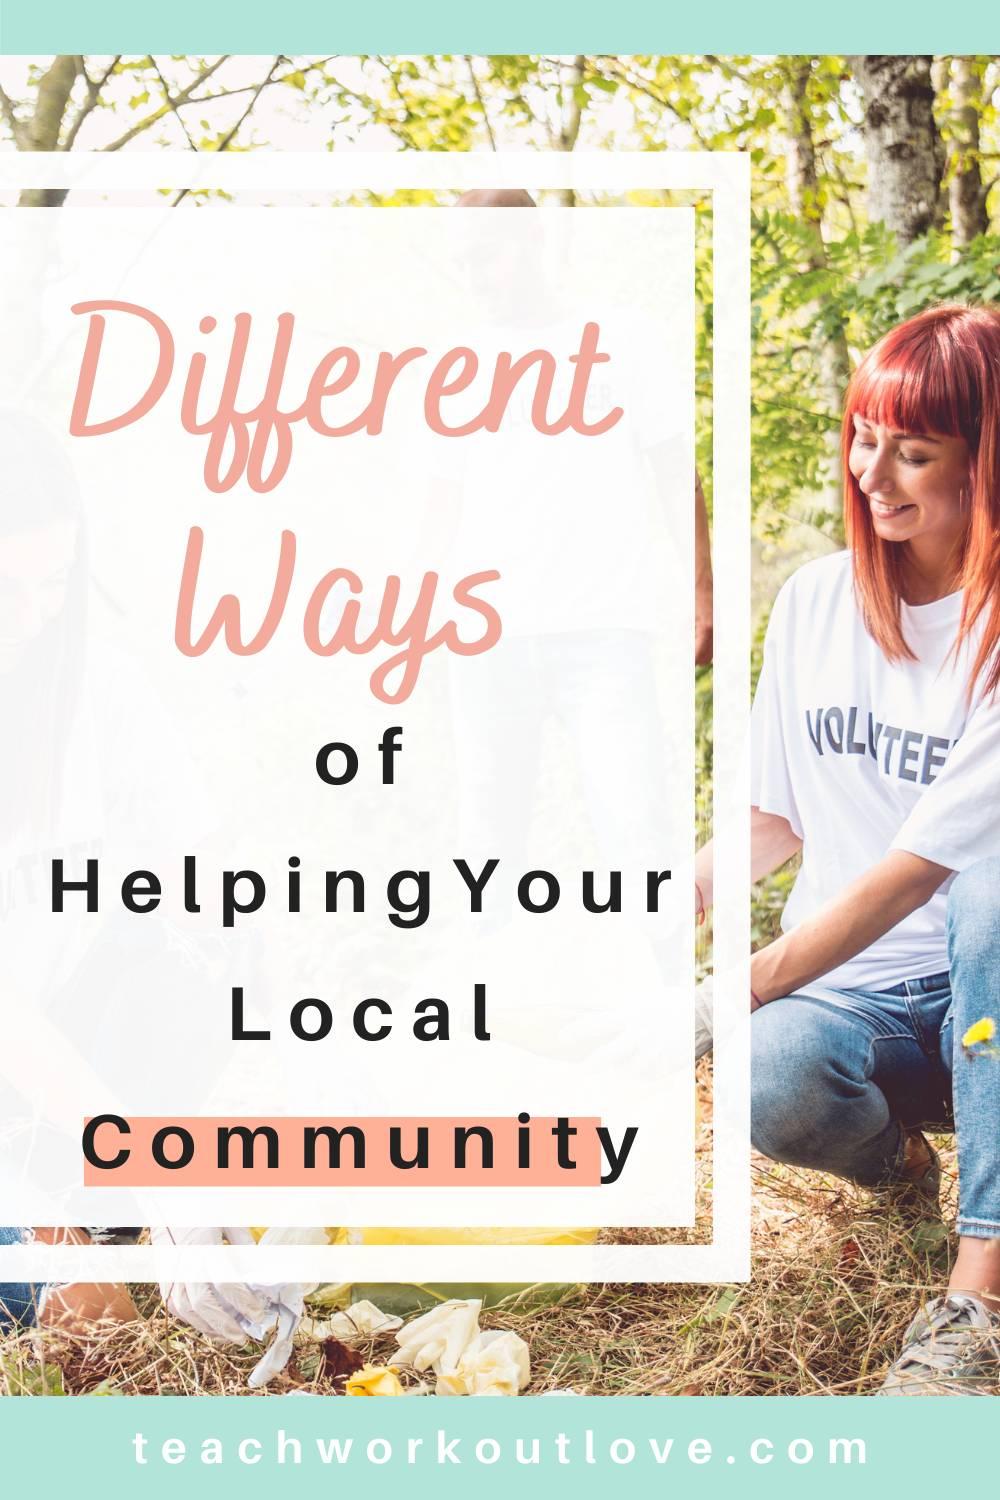 Helping the community is something that we should make time for, it makes life better for all. Here are Different Ways To Helping Your Local Community.